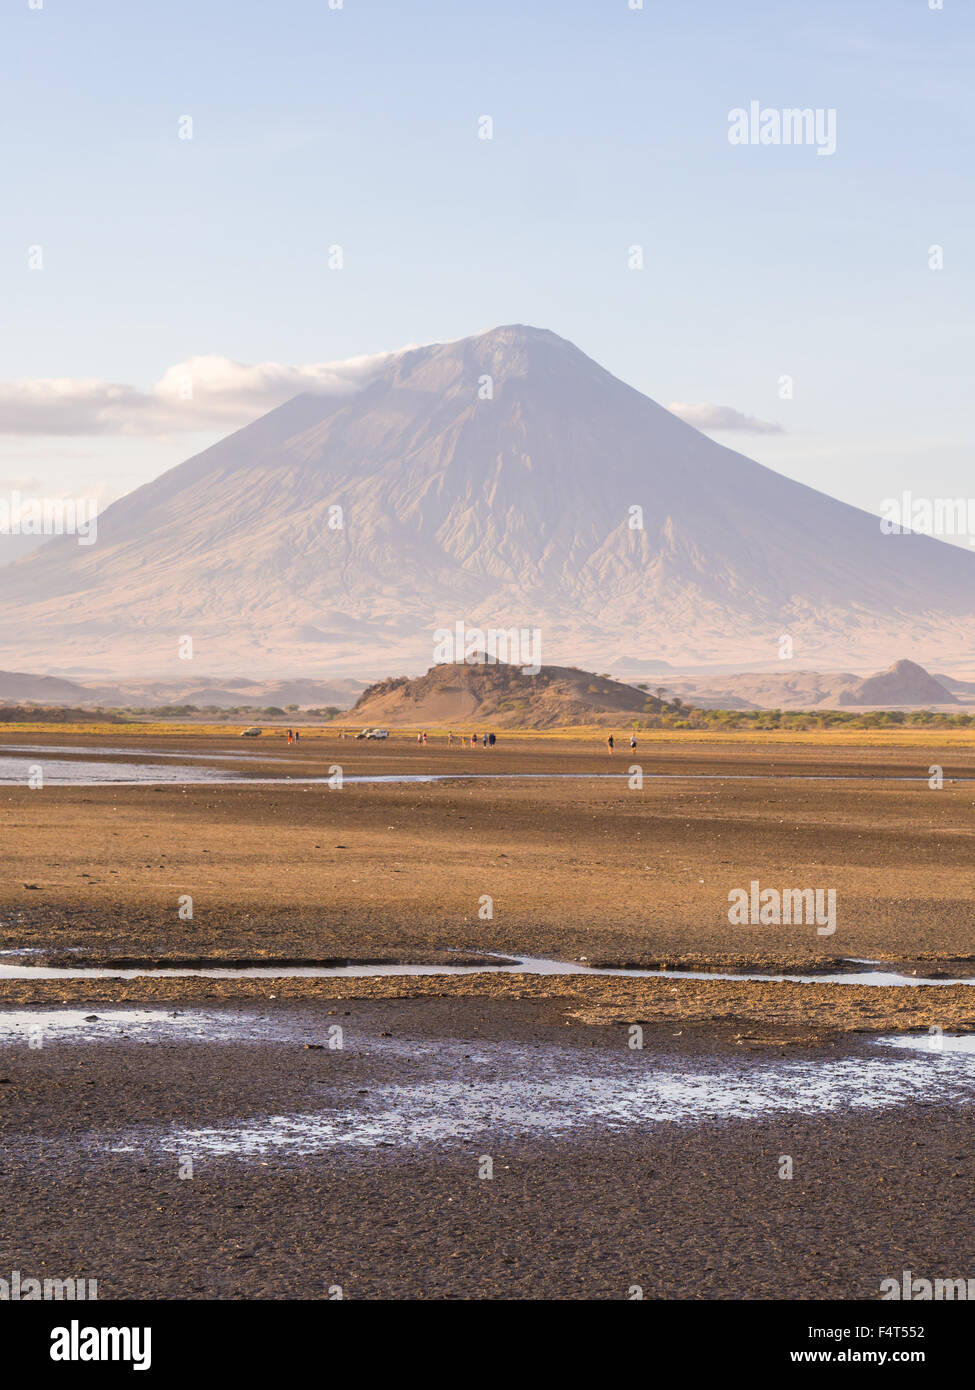 Ol Doinyo Lengai (Mountain of God in the Maasai language), an active volcano in the Northen Tanzania, seen from the dried Lake N Stock Photo